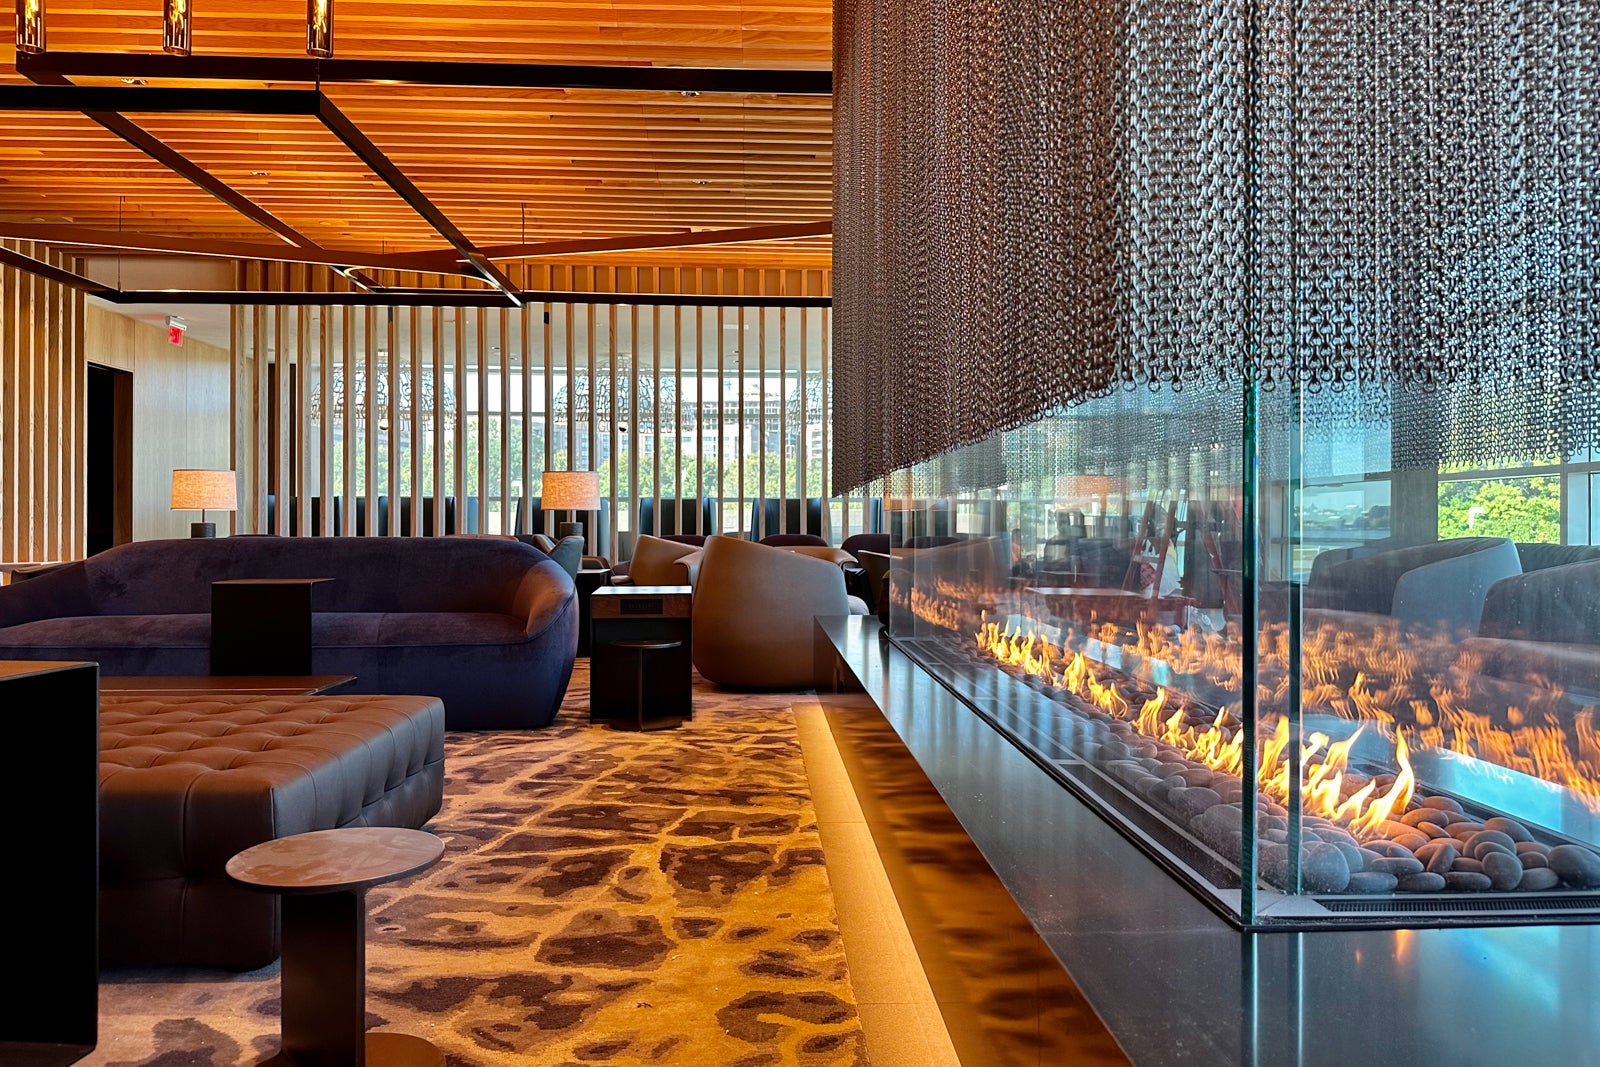 The new airport lounges we can't wait to enjoy in 2023 - The Points Guy